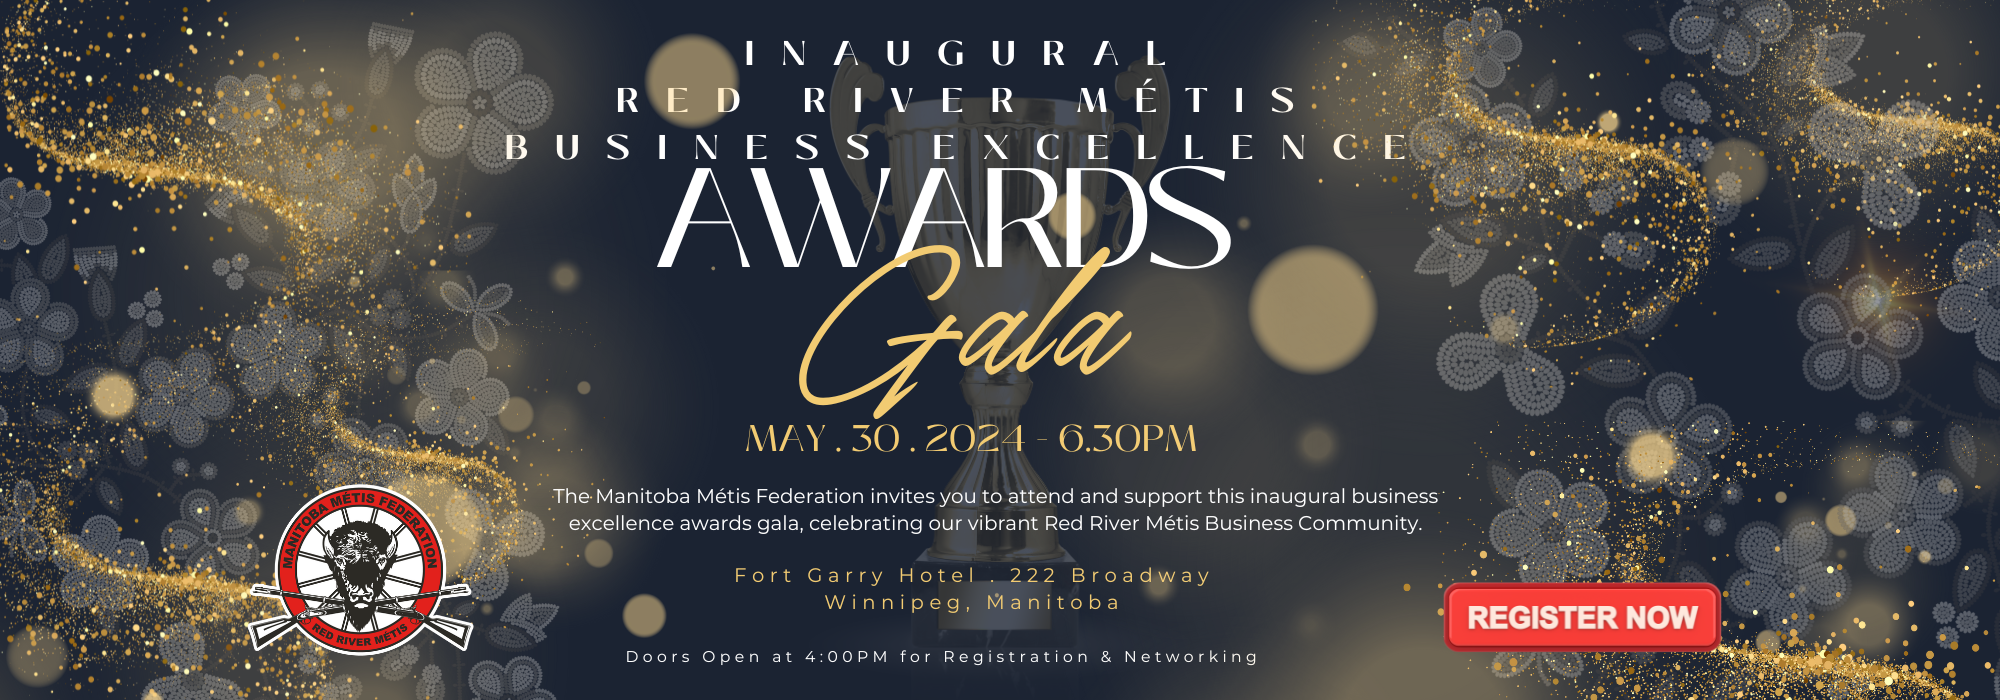 Inaugural Red River Mtis Business Excellence Awards Gala